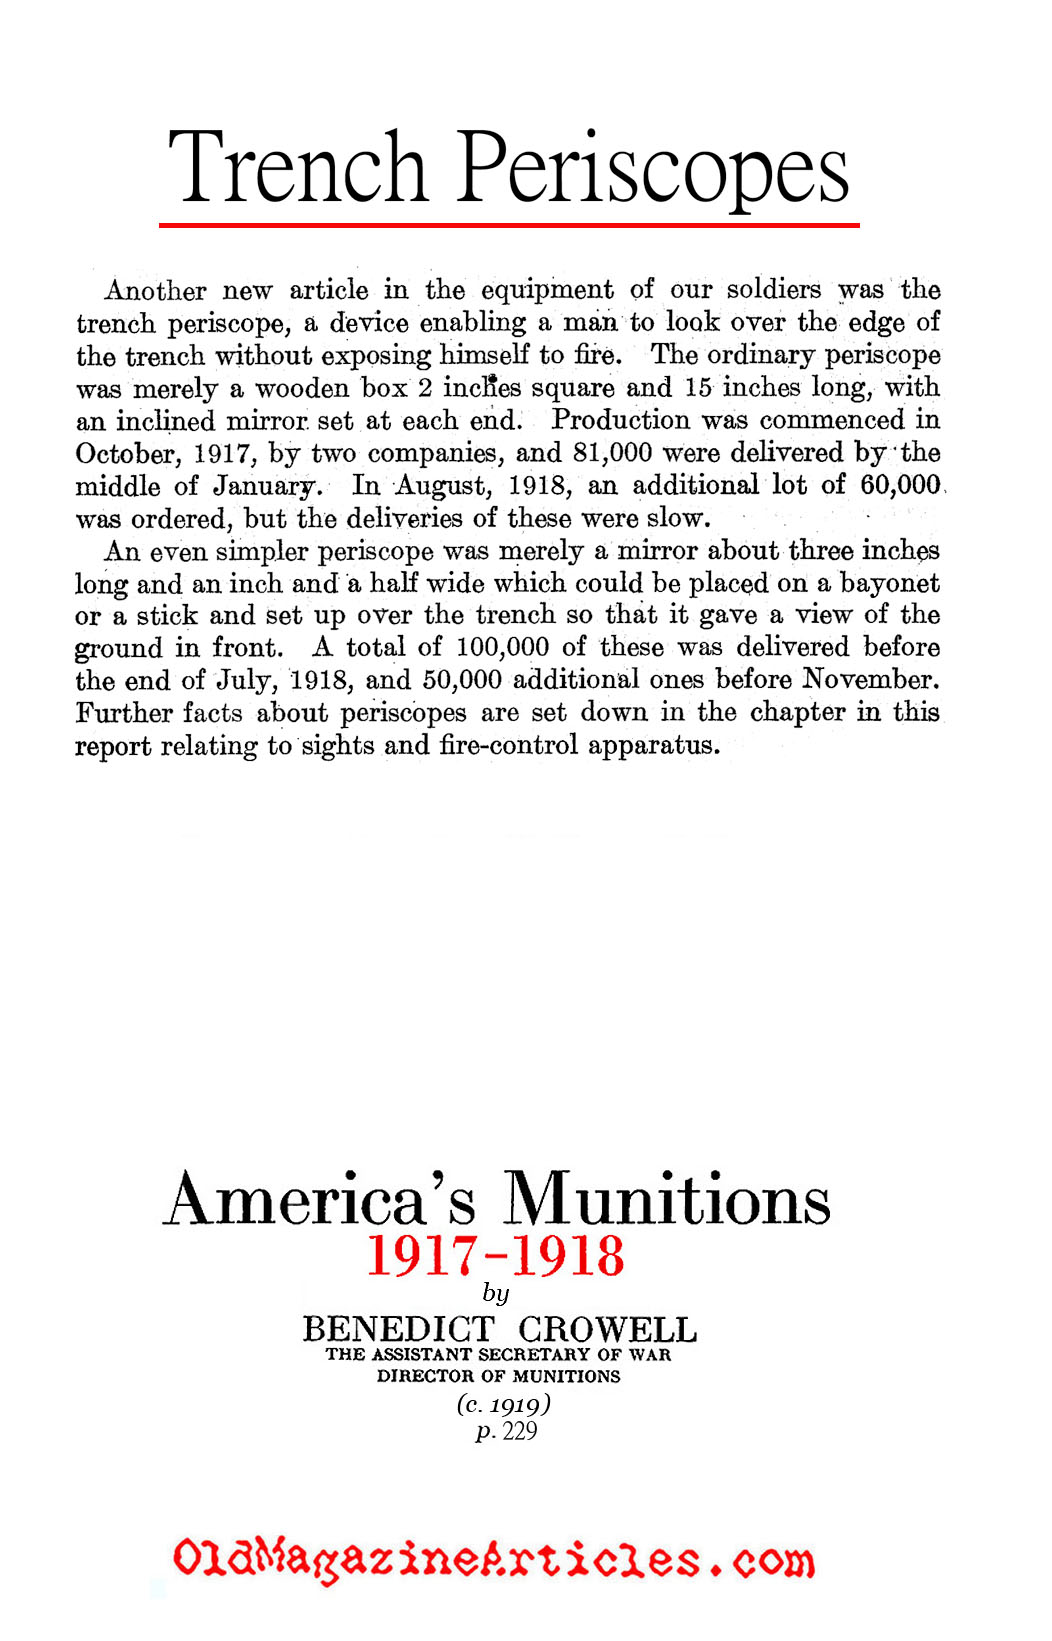 American Trench Periscopes (America's Munitions, 1919)